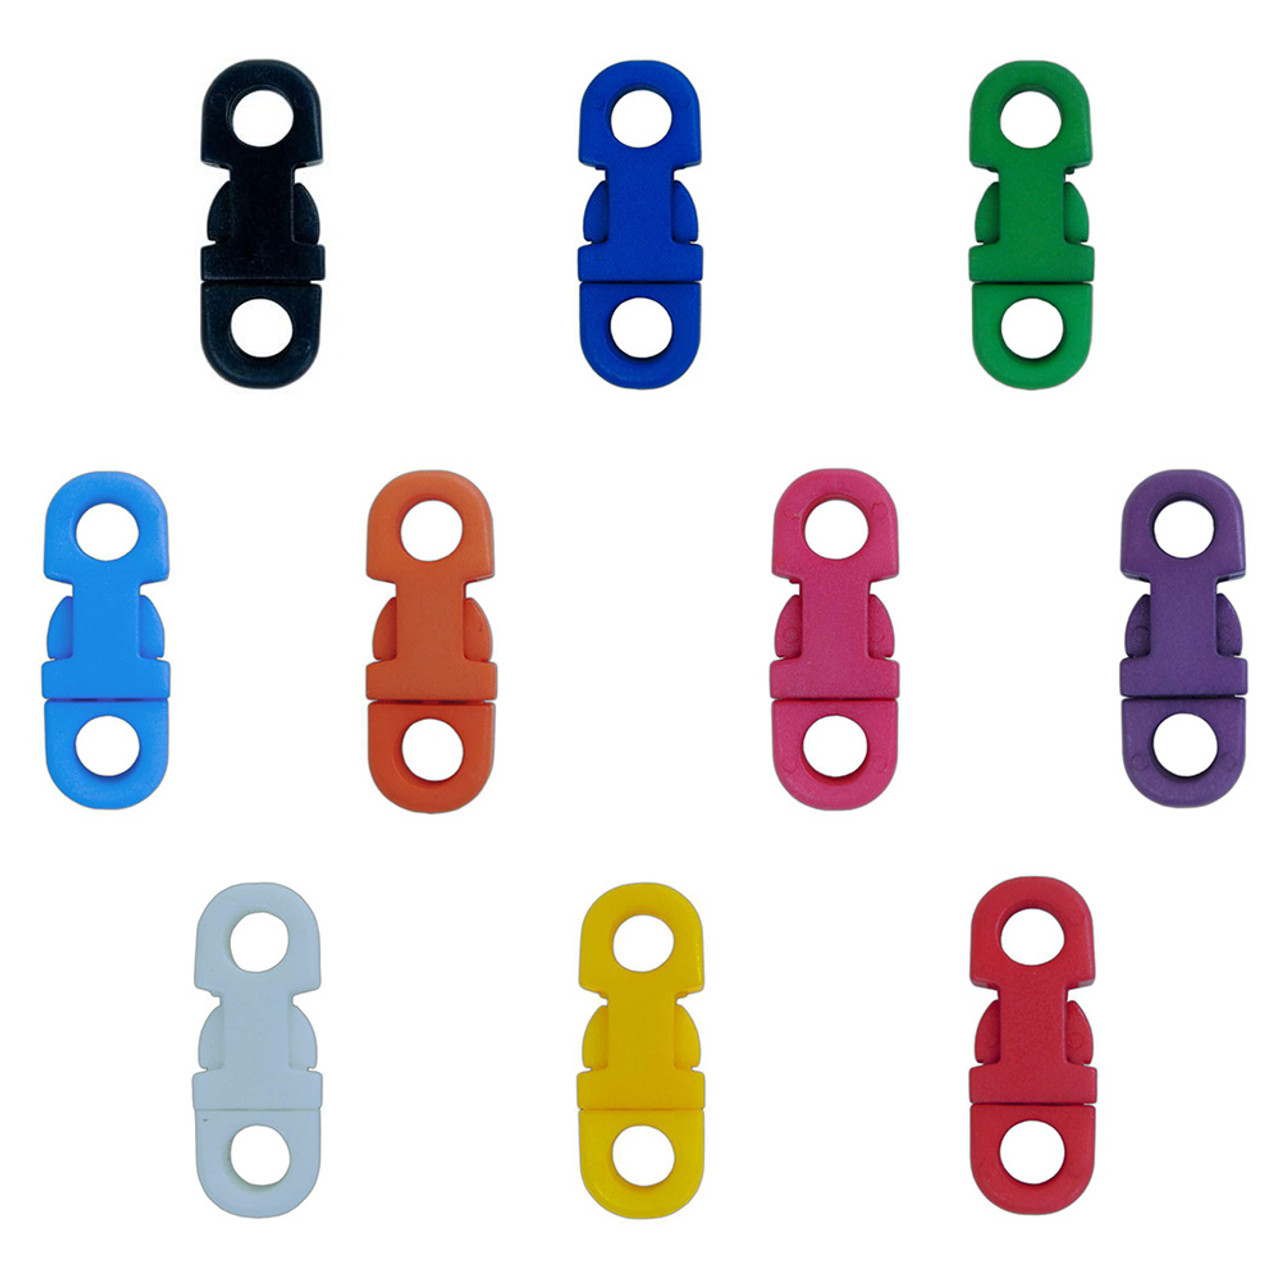 12pcs 3/8 Colorful Safety Side Release Buckle Mini Paracord